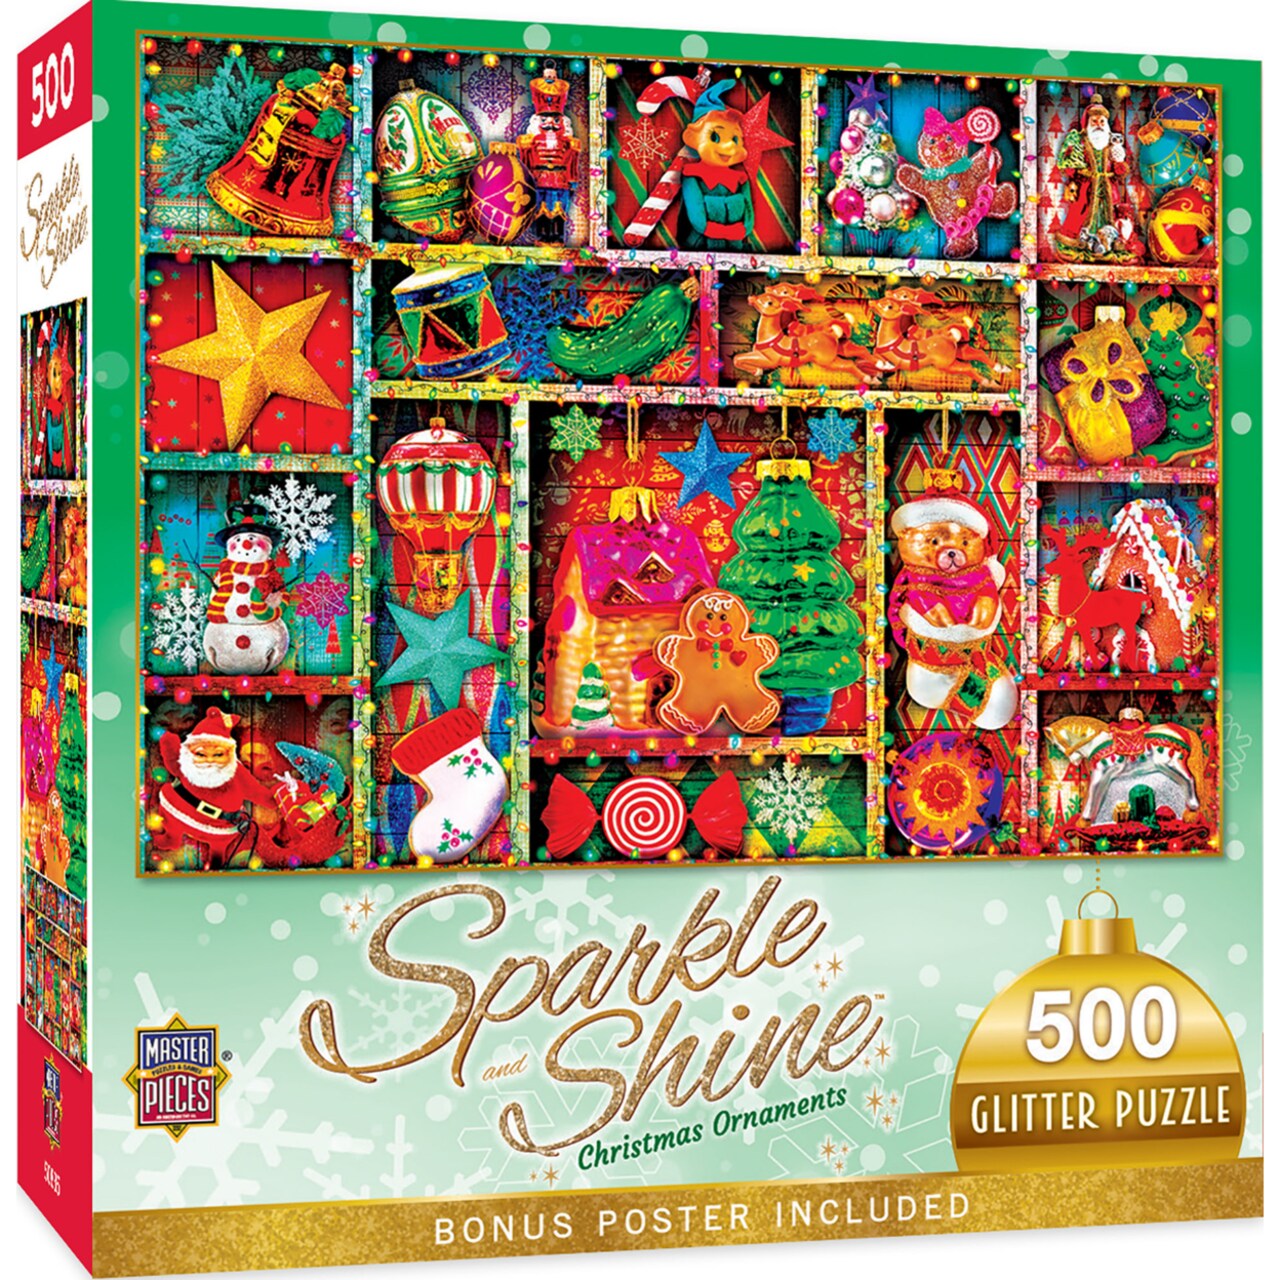 Masterpieces   500 Piece Glitter Jigsaw Puzzle - Christmas Ornaments